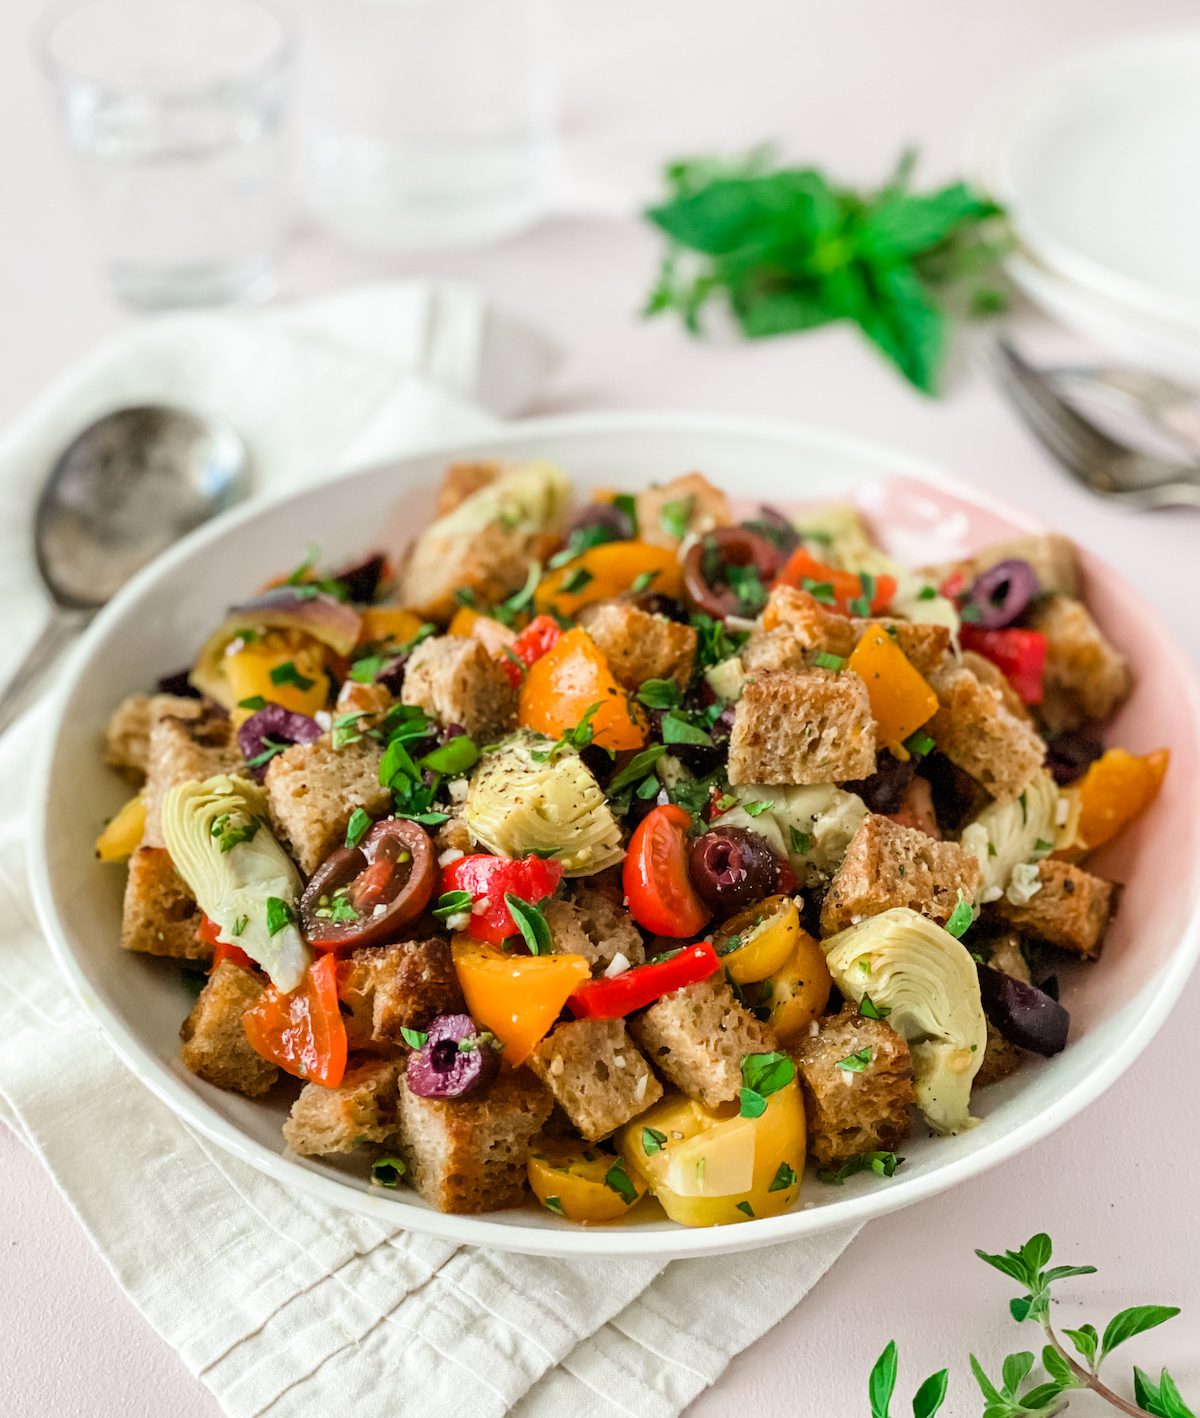 Panzanella bread salad with olives, tomatoes and artichokes with fresh herbs